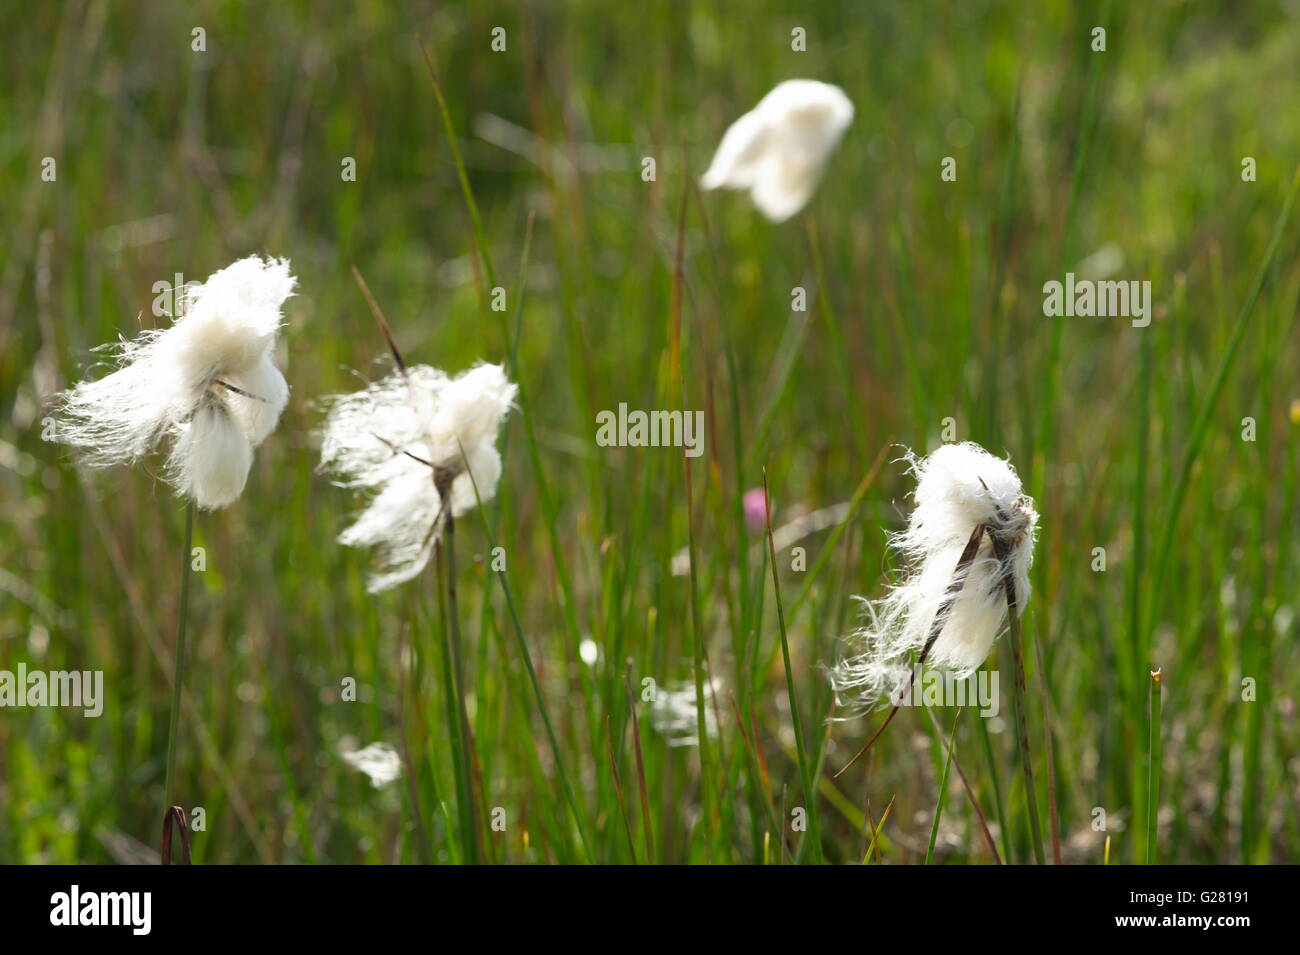 White  Cottongrass flowers blow in the wind resembling Lambs tails on wet moorland Gower Wales Stock Photo